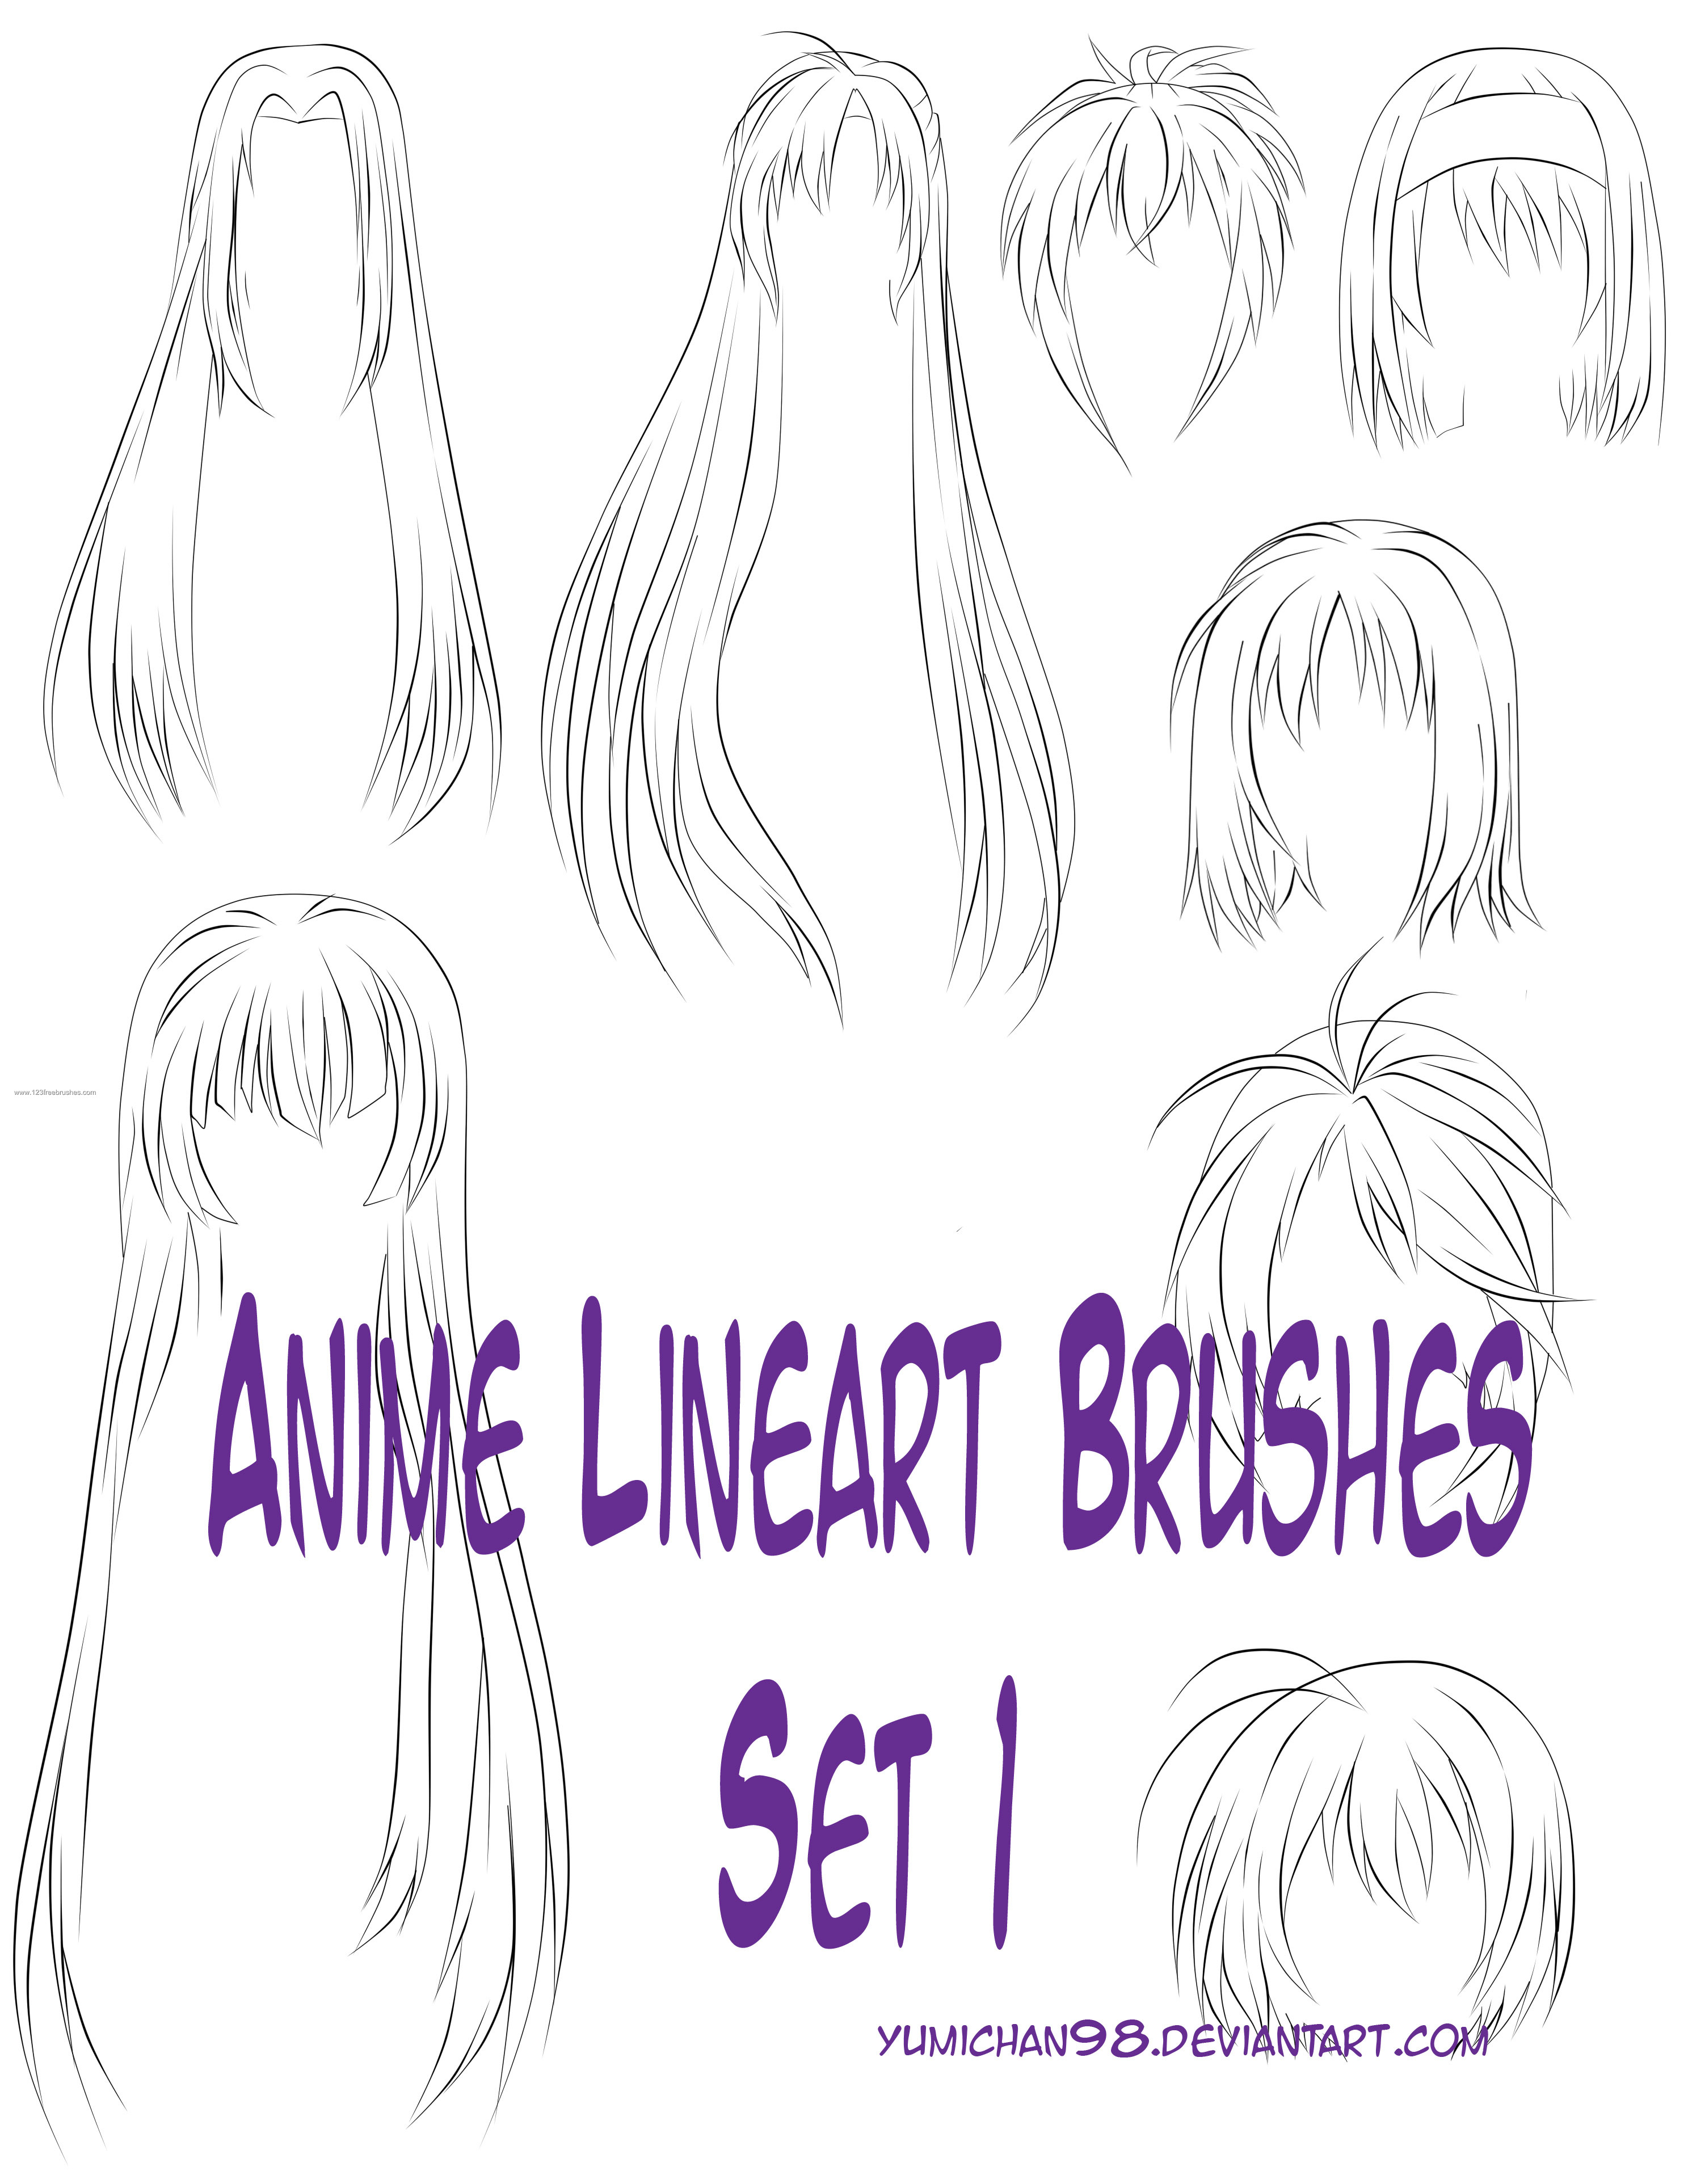 Some ideas of hairs egirl  anime hair  Yesterday i was lin pinterest  and saw this beautiful wigs so maybe it could be a new release There are  very few colorful